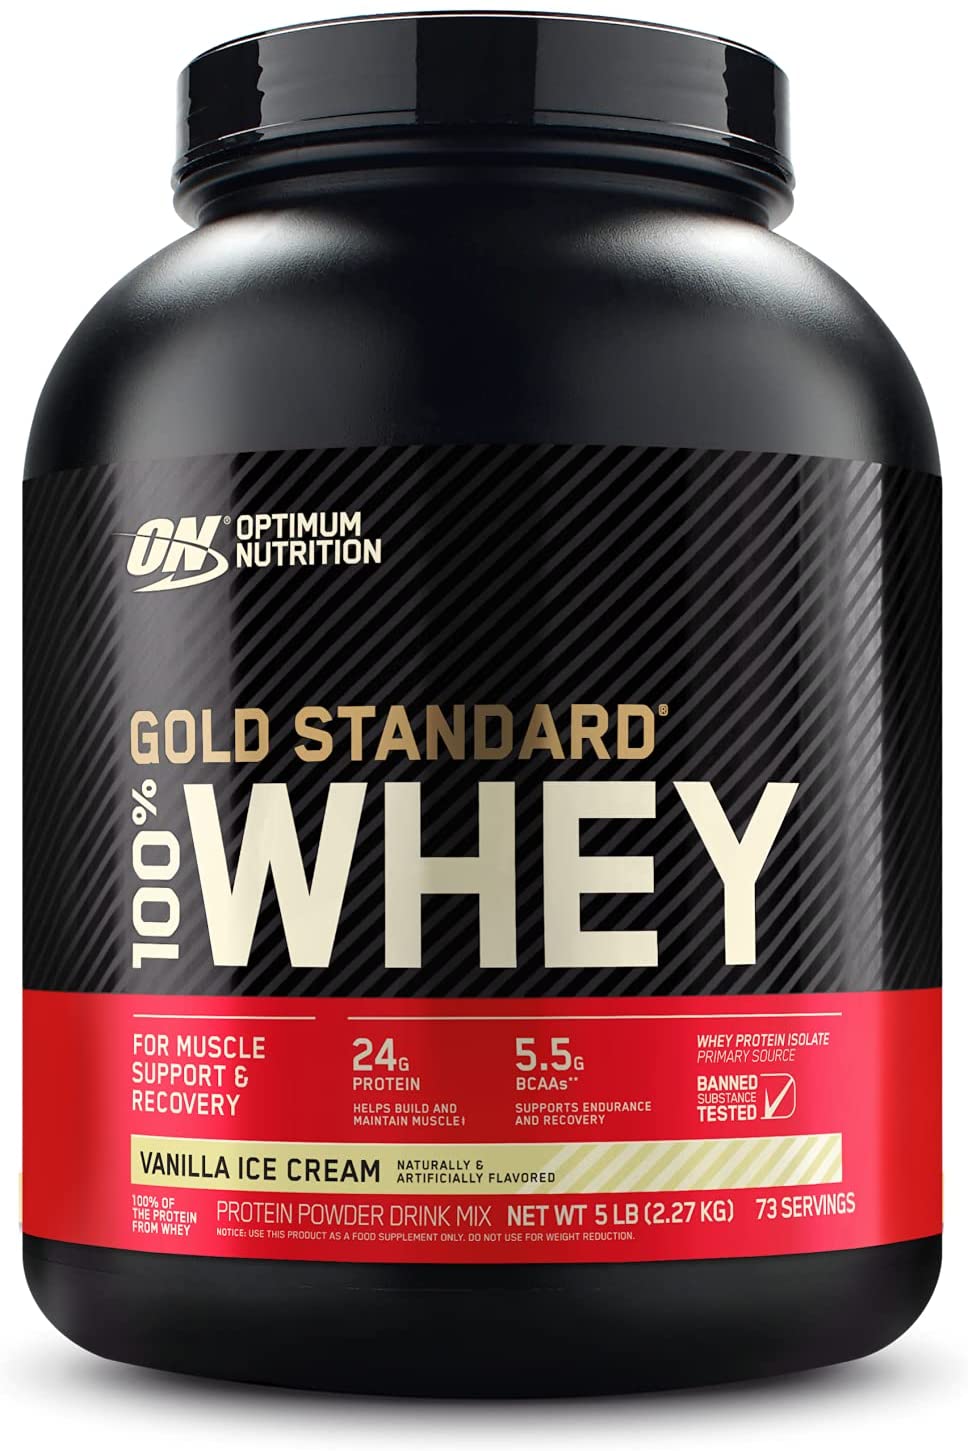 Protein shakes to lose weight- Optimum Nutrition Gold Standard 100% Whey Protein Powder